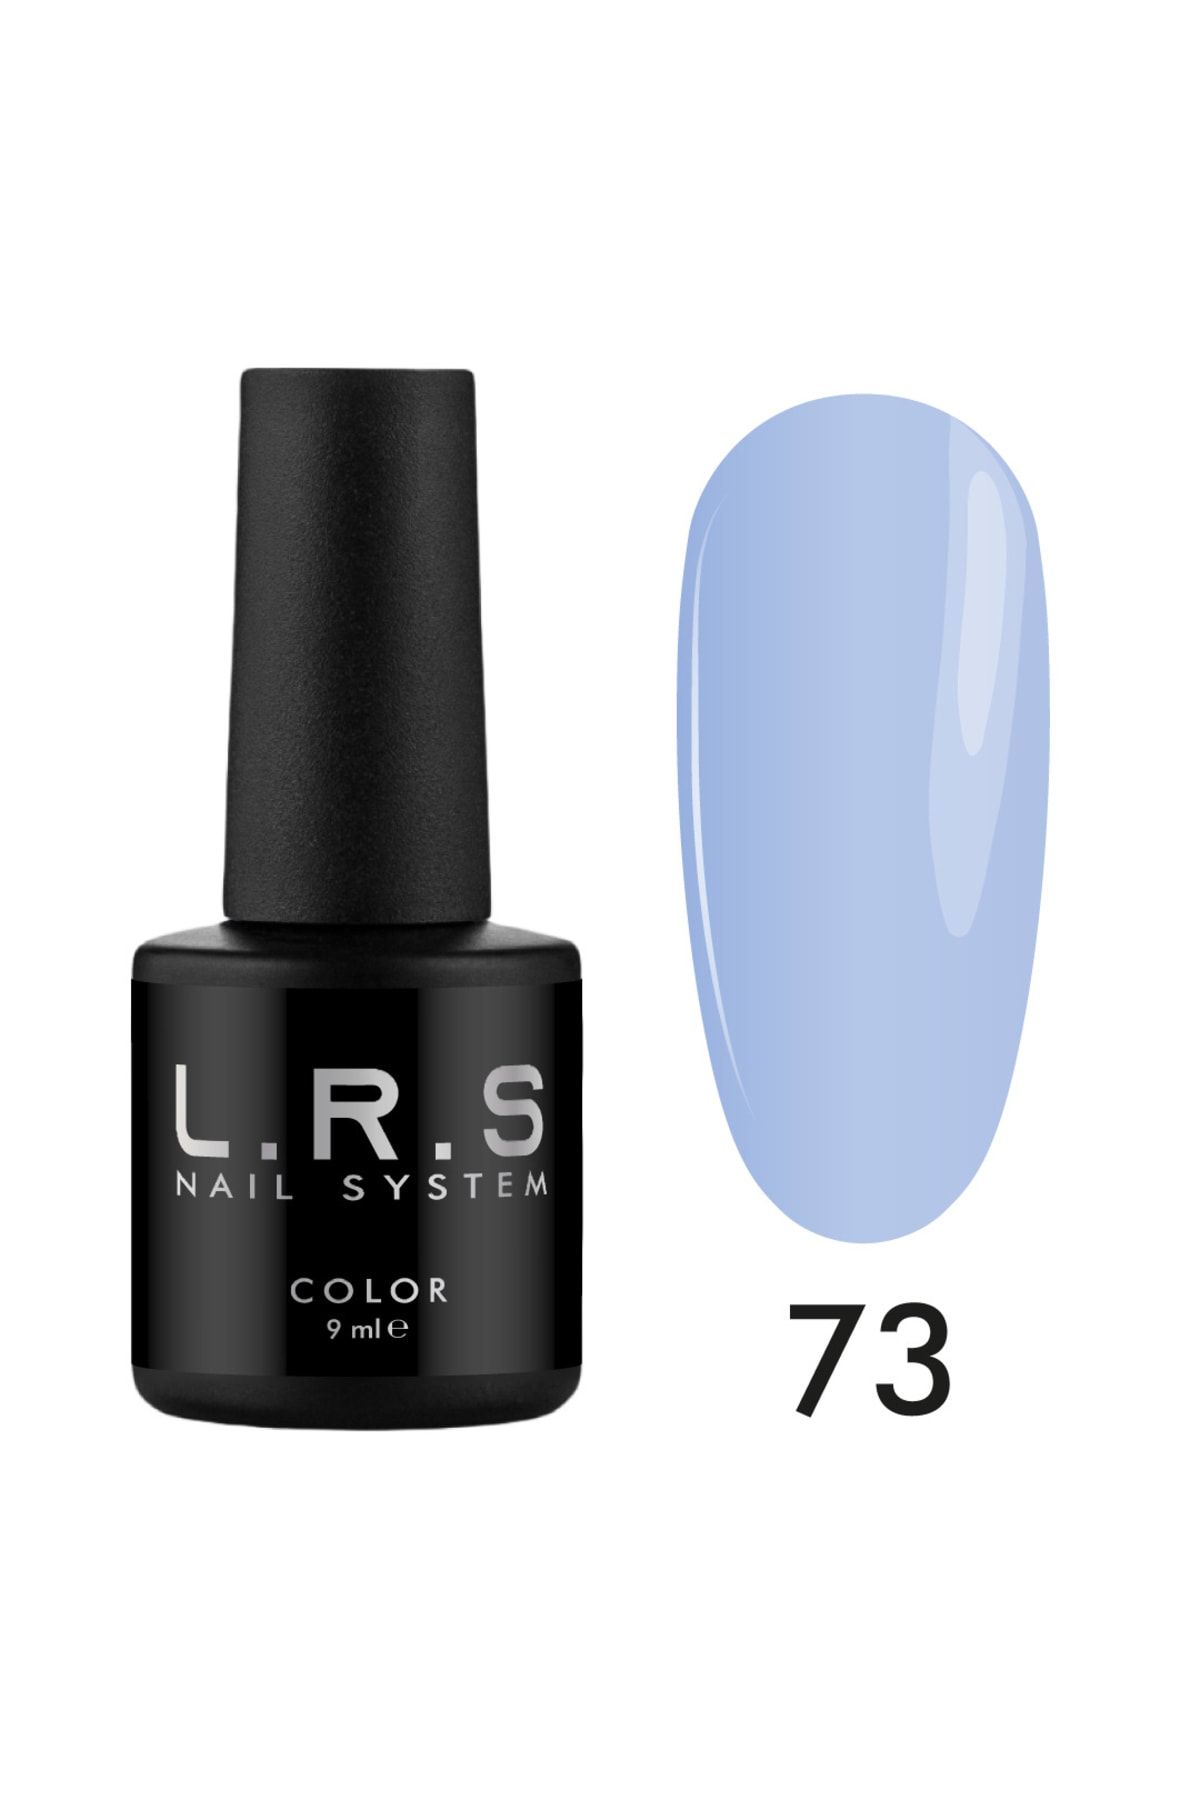 PNB Lrs Nail System 9ml Color 73